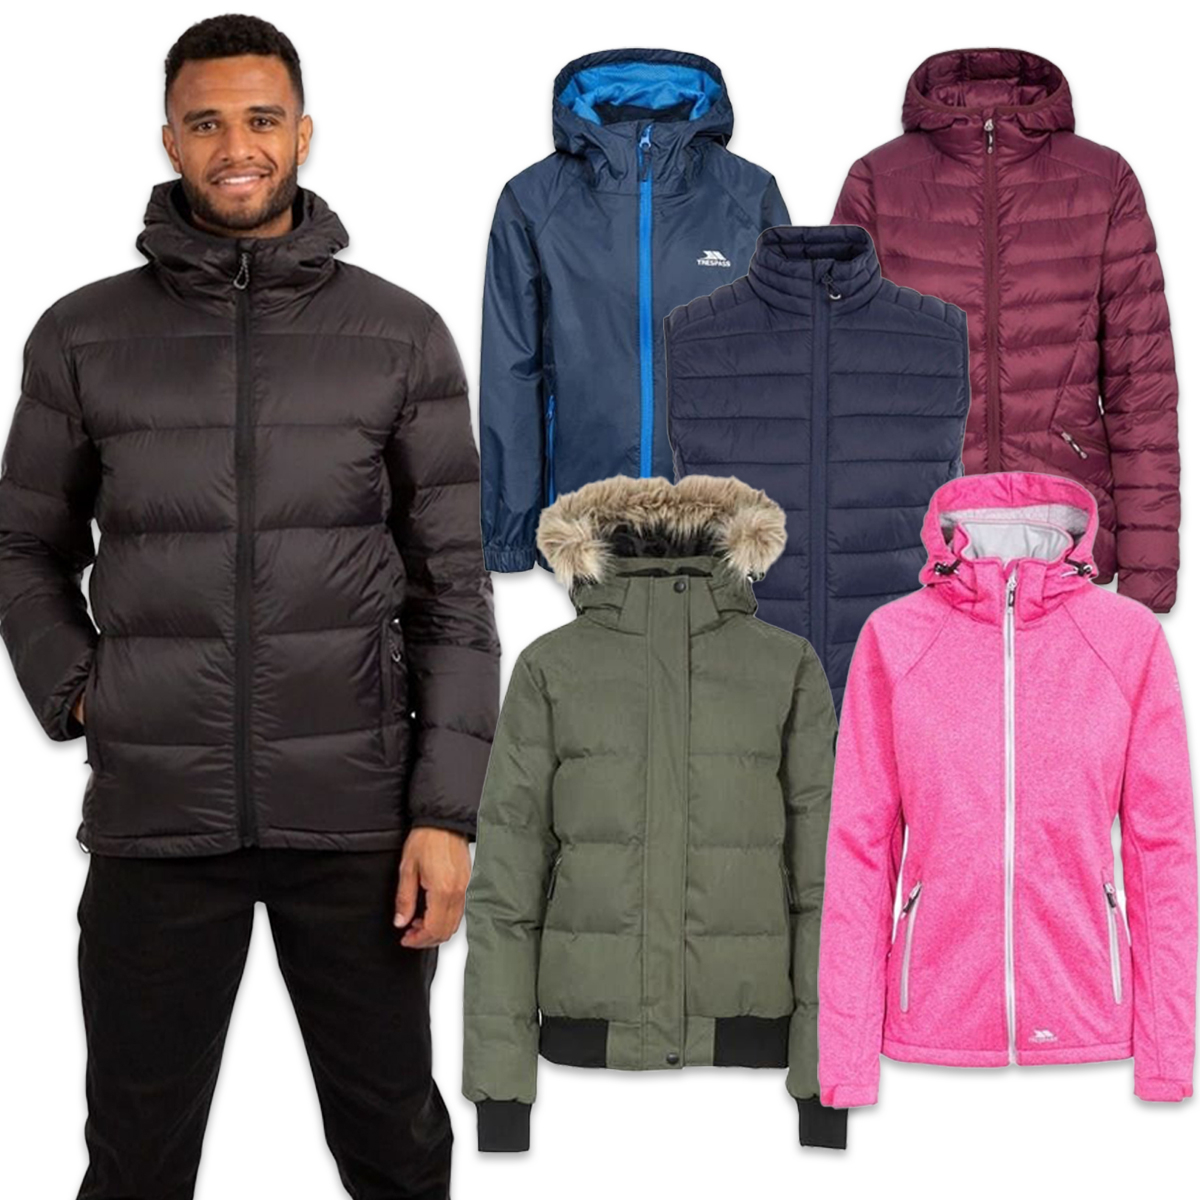 Deal Alert: Save Up to 72% On Trespass Puffer Jackets & More Right Now